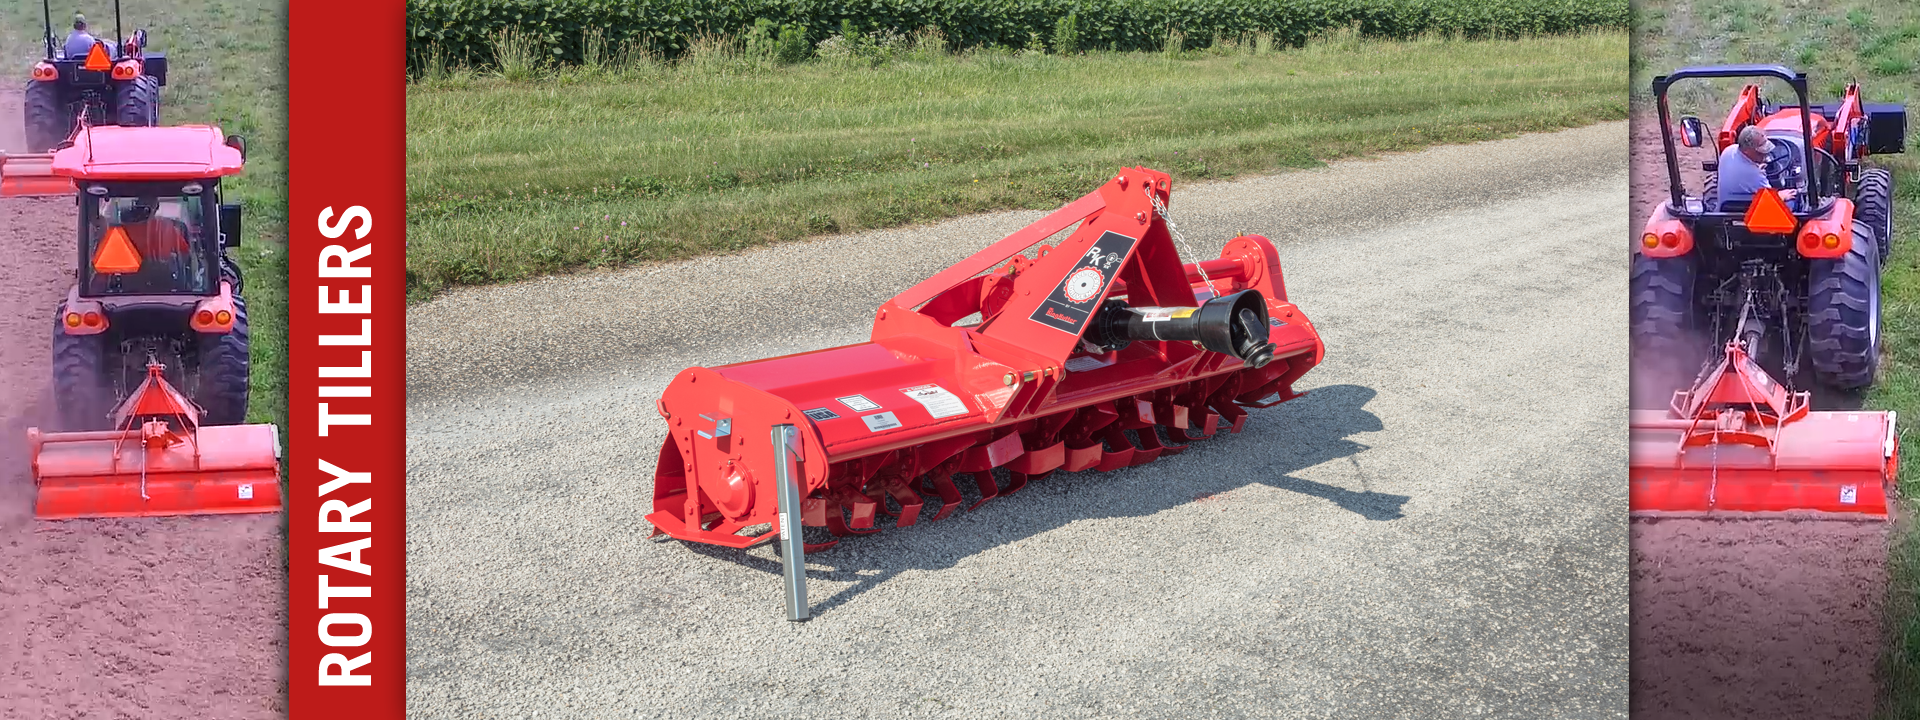 rotary tillers